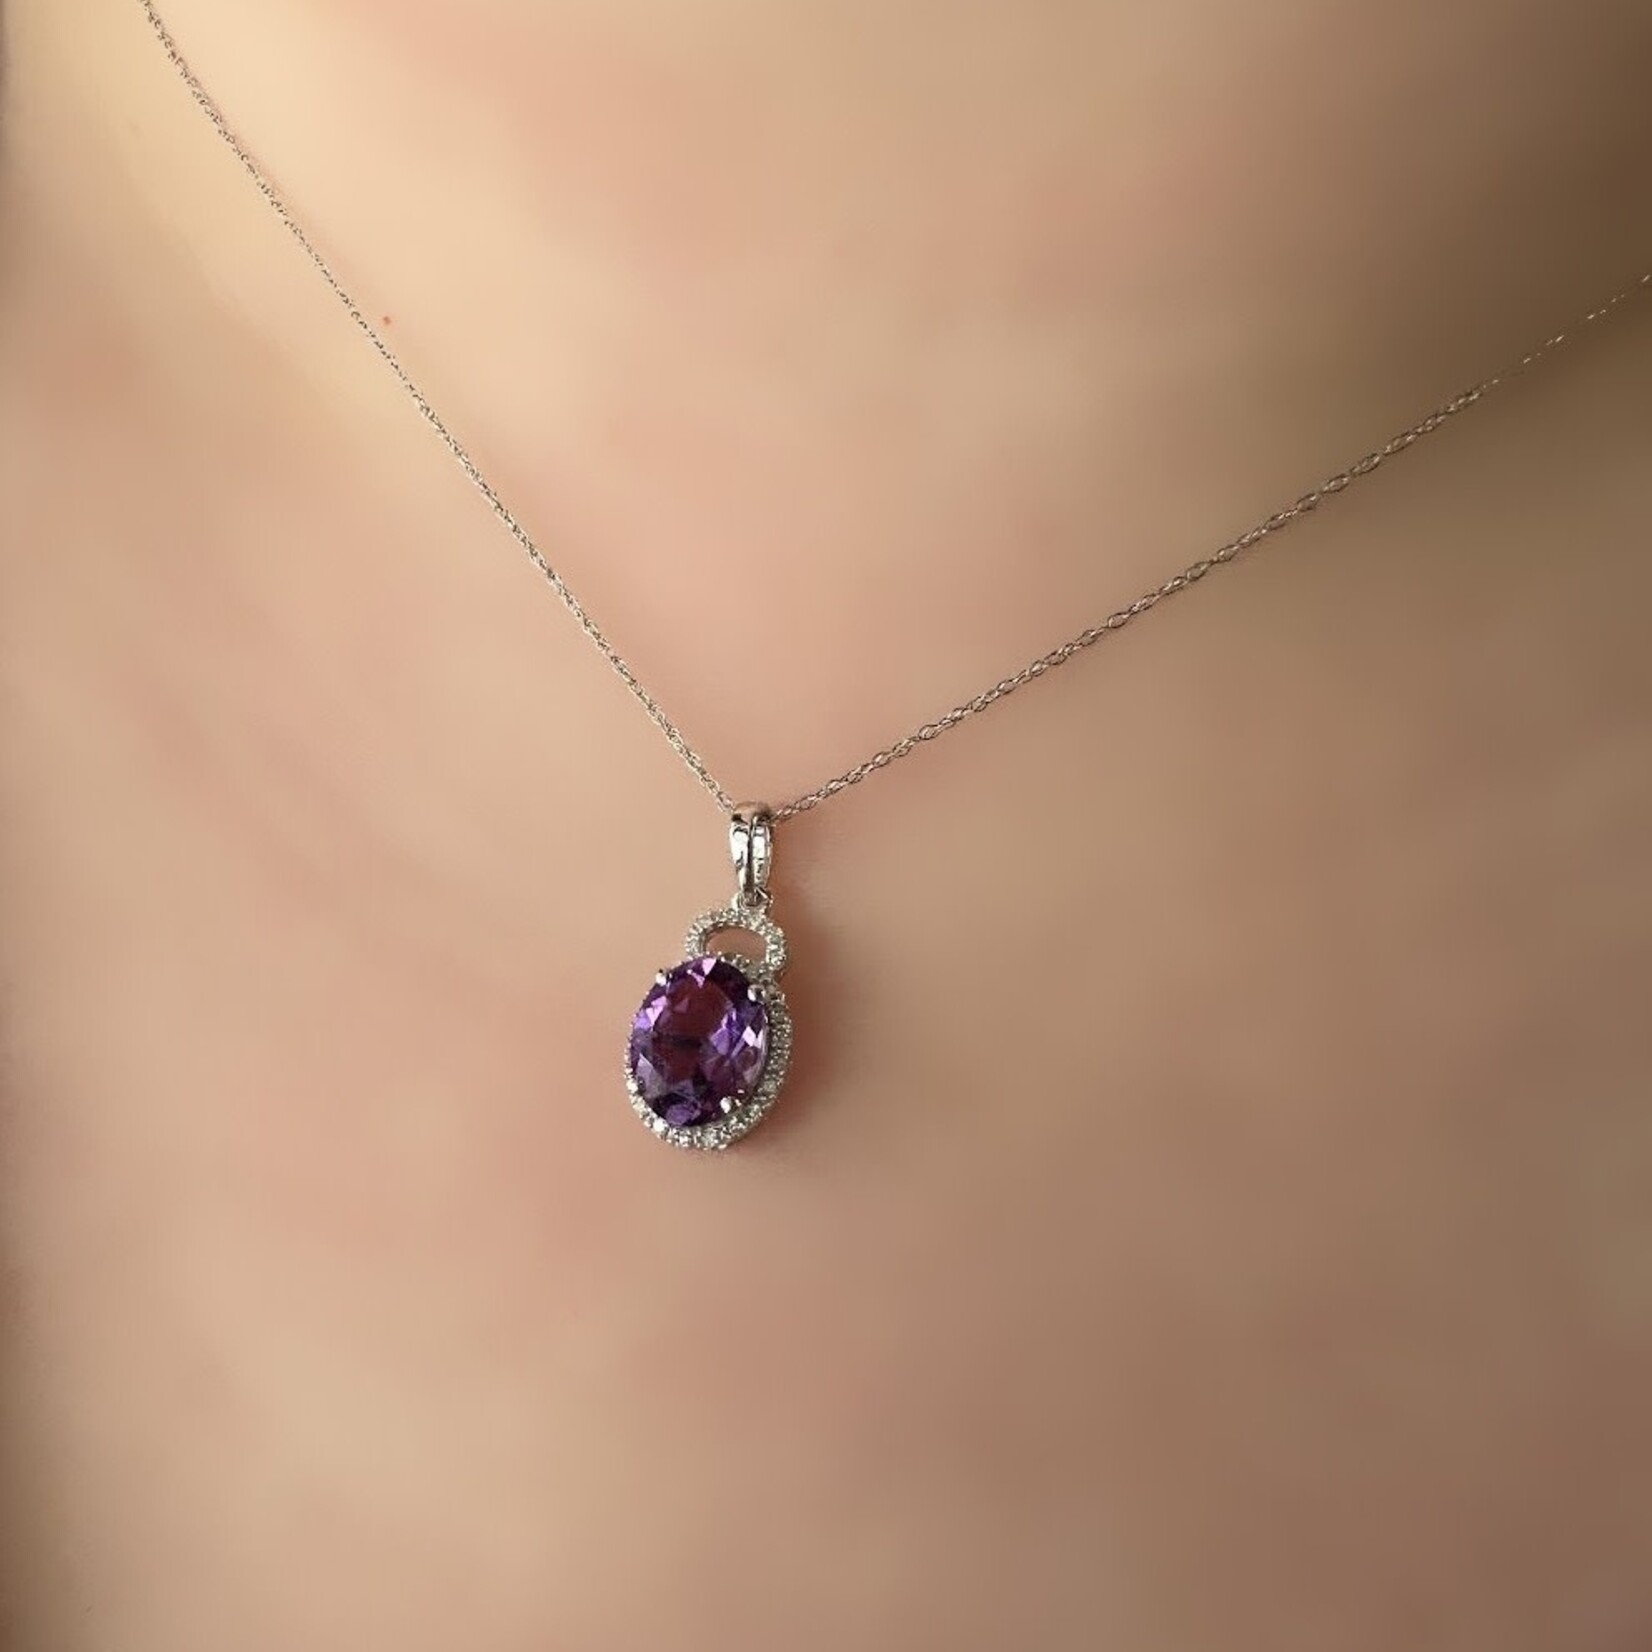 10k White Gold Oval Amethyst & Diamond Pendant with Chain